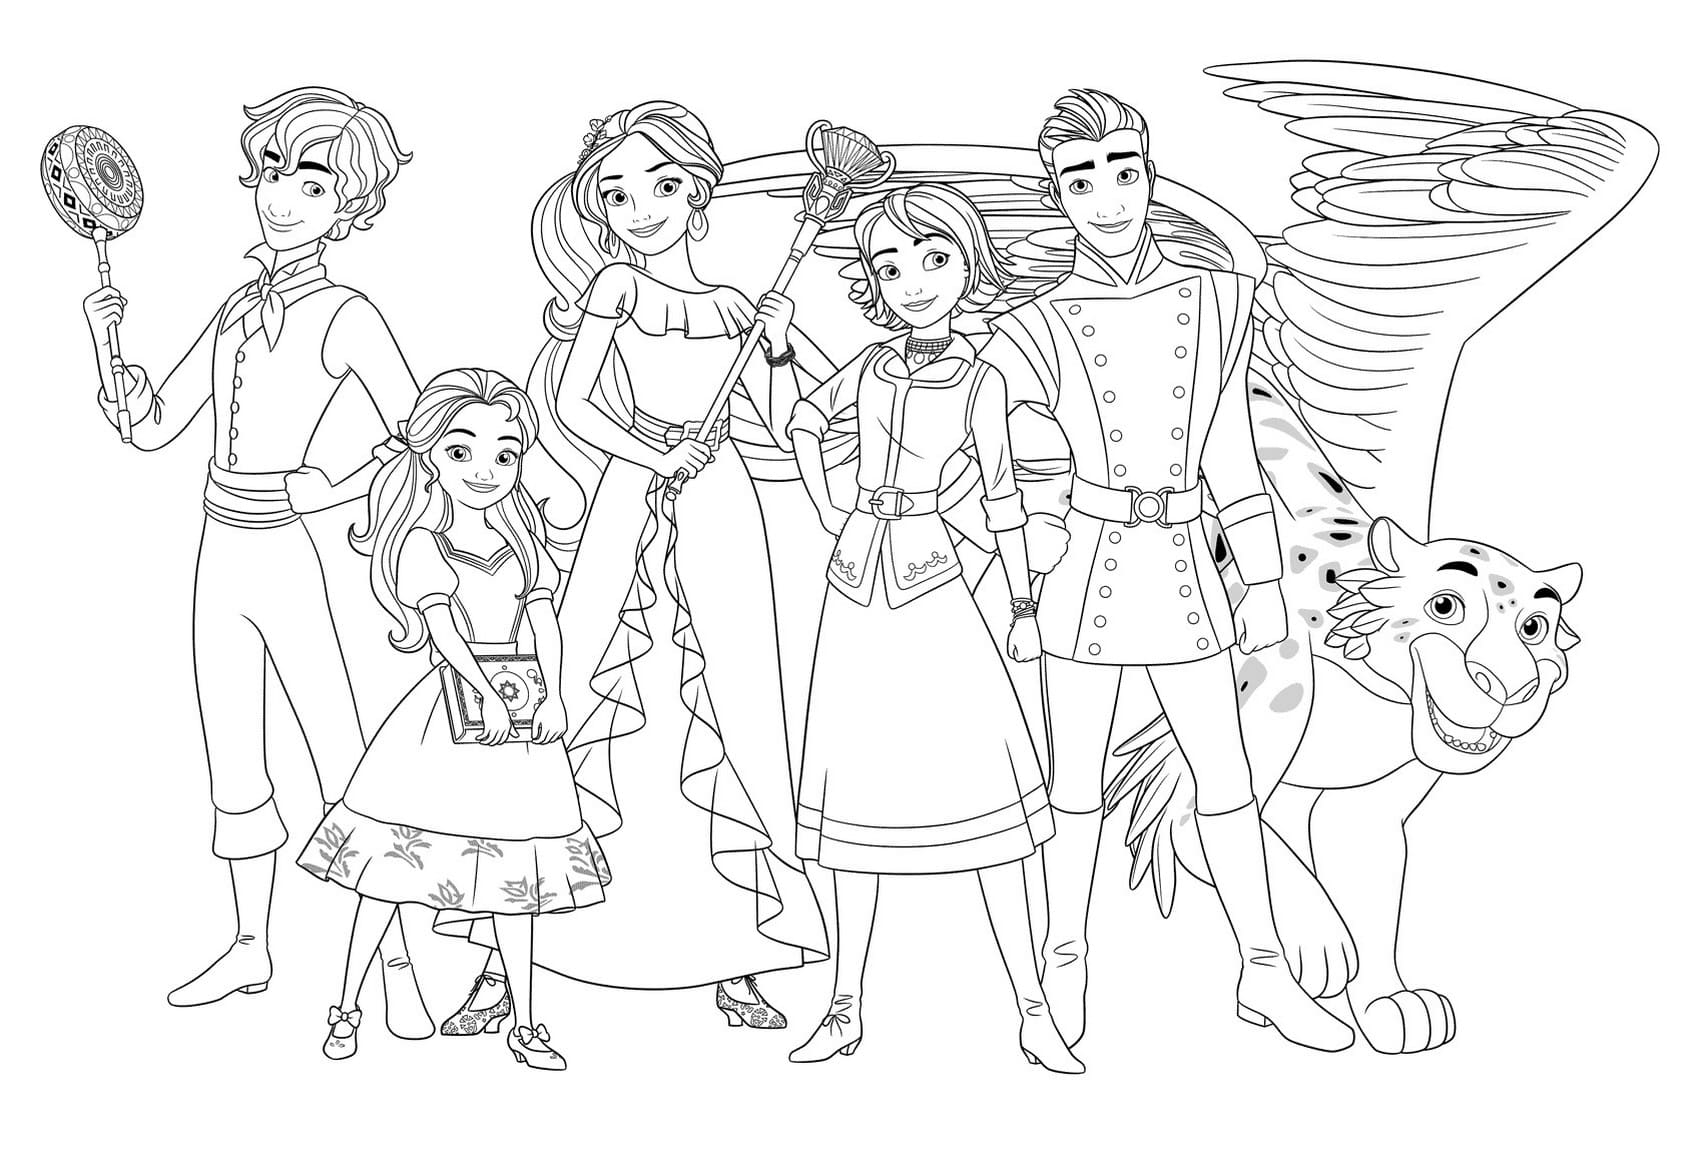  4500 Collections Coloring Pages Princess Elena  Best Free